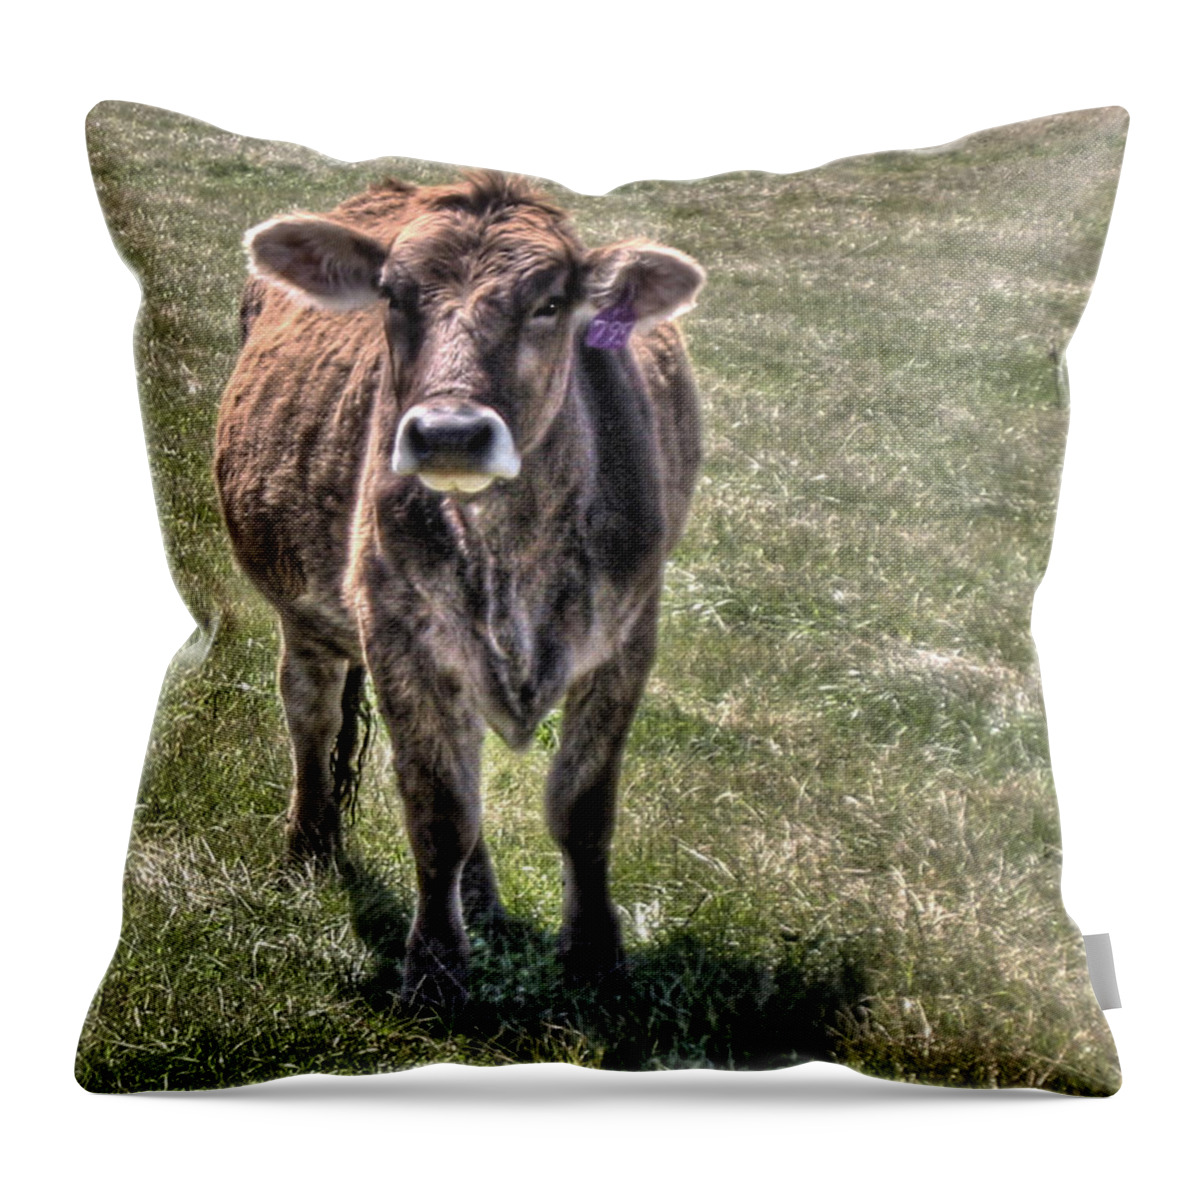 She Is A Spokesperson For Her Tribe Throw Pillow featuring the photograph She is a Spokesperson for Her Tribe by William Fields